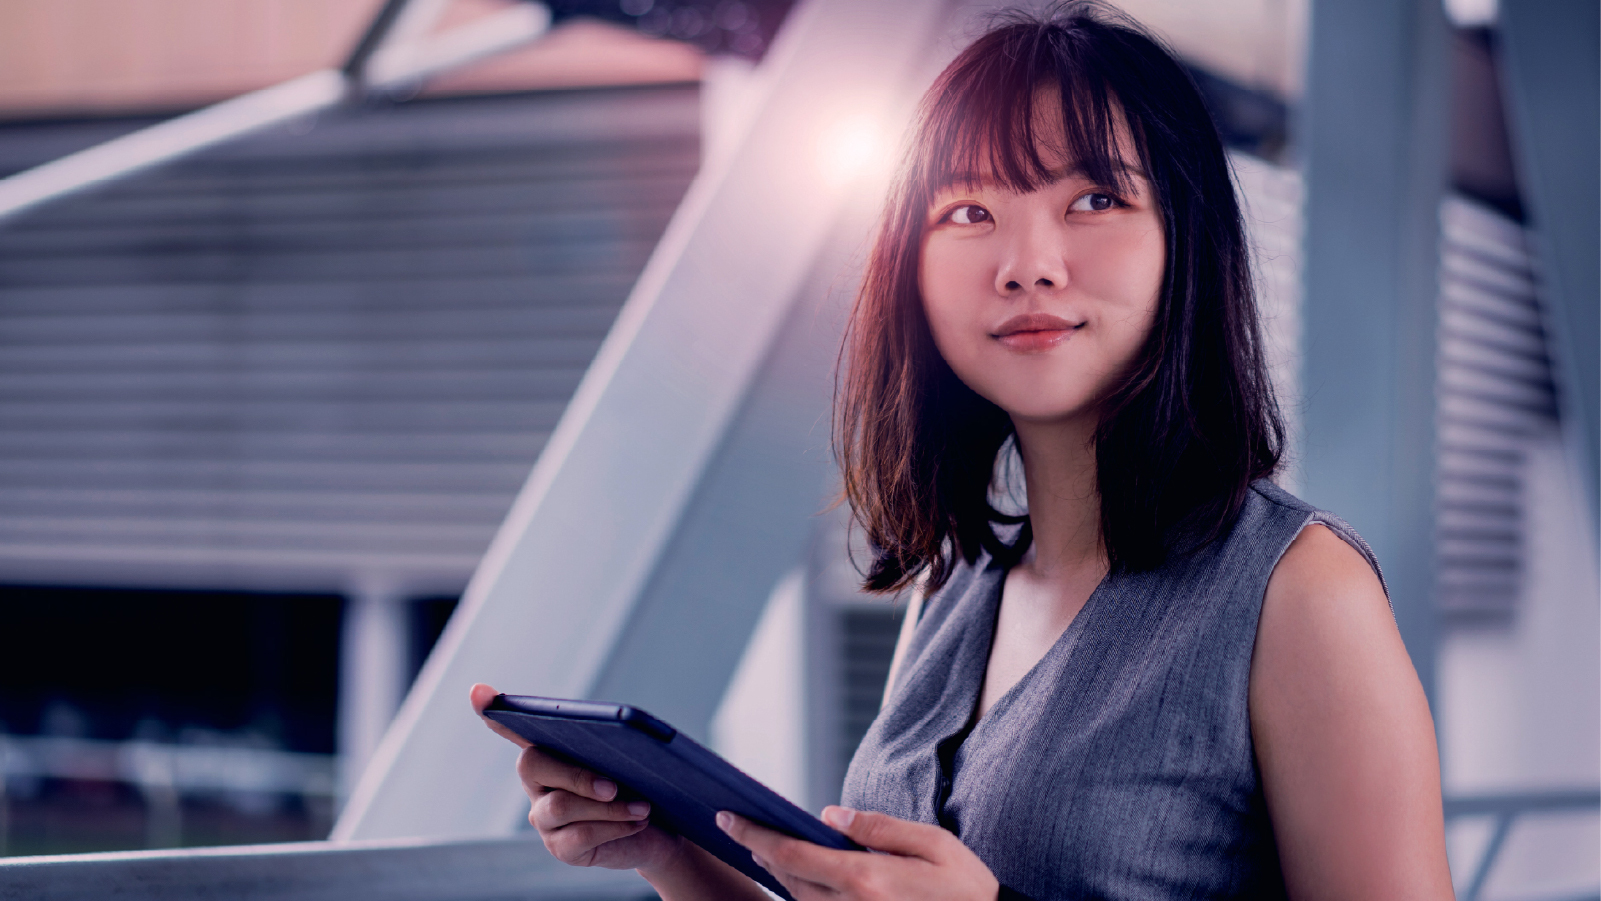 Businesswoman in professional attire holding a tablet looking contemplative